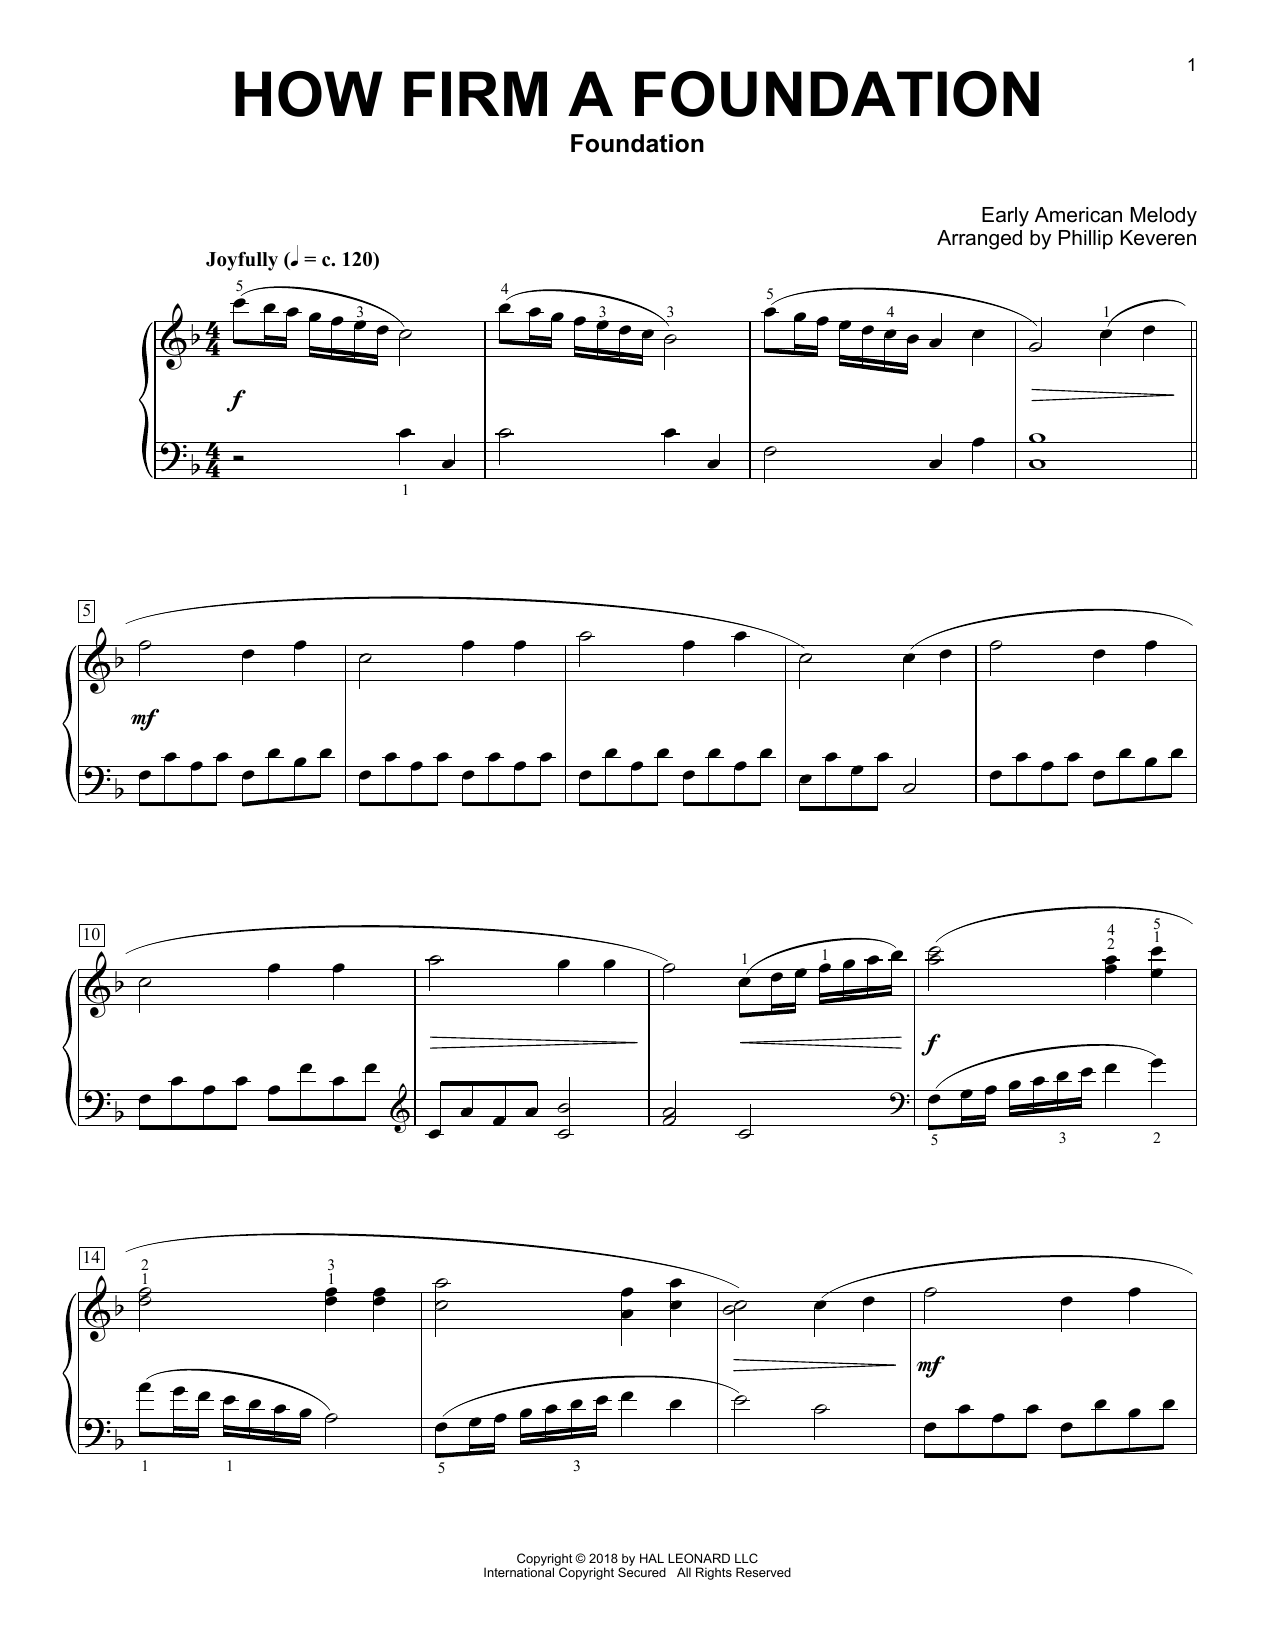 Download Early American Melody How Firm a Foundation [Classical versio Sheet Music